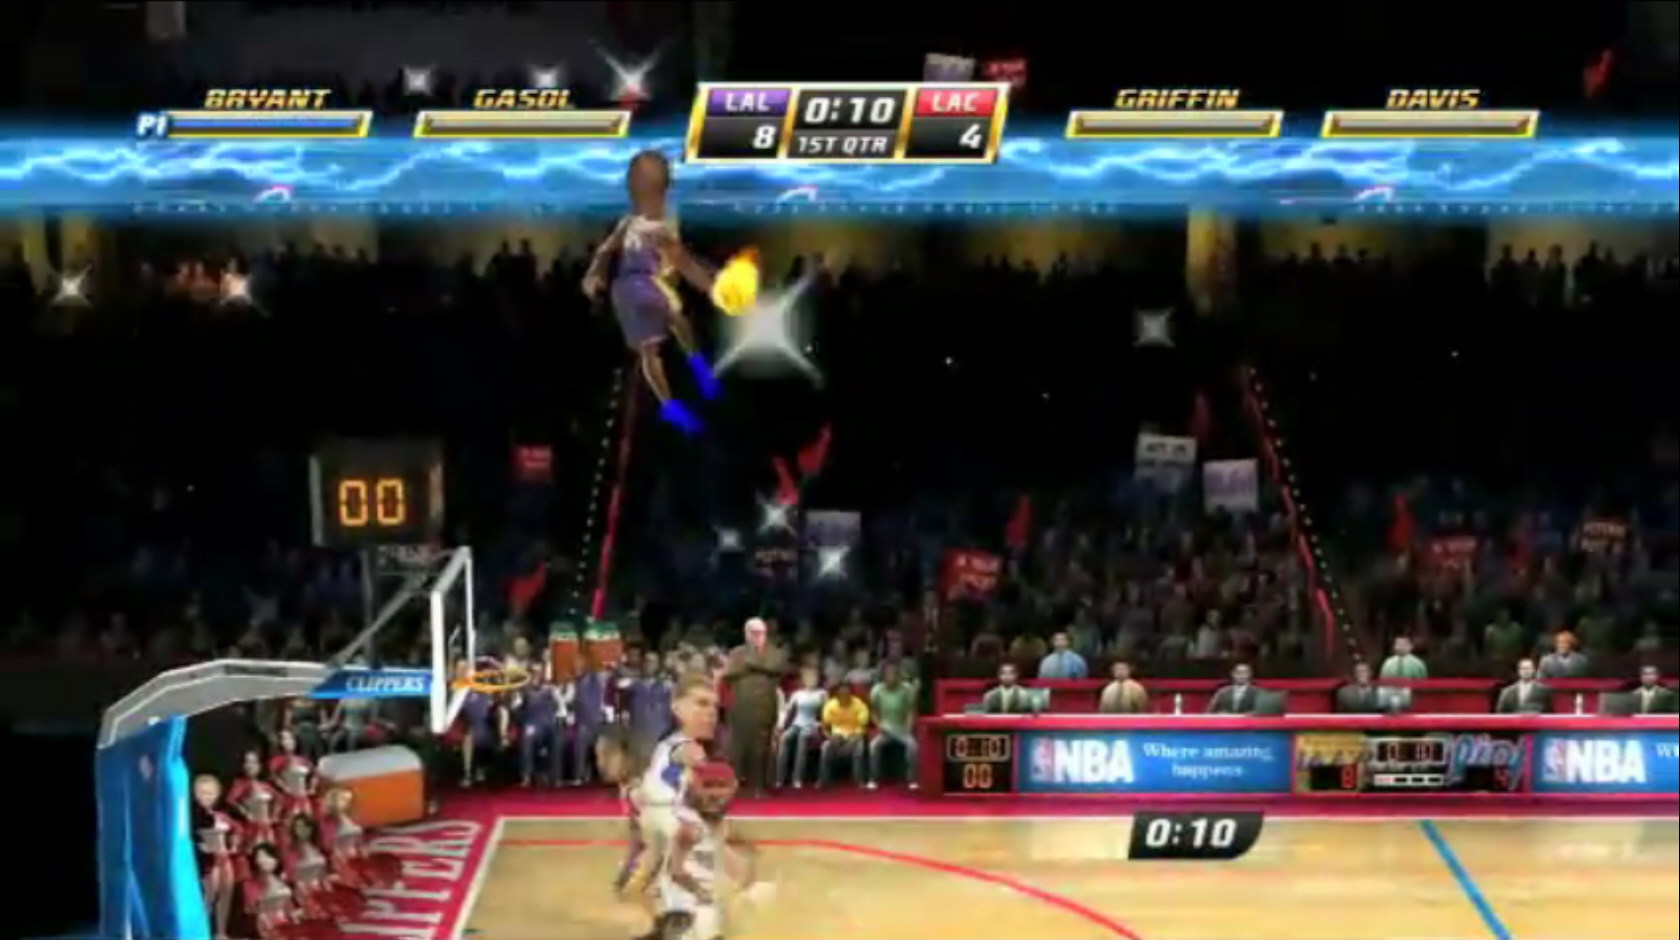 nba jam on fire edition free download pc